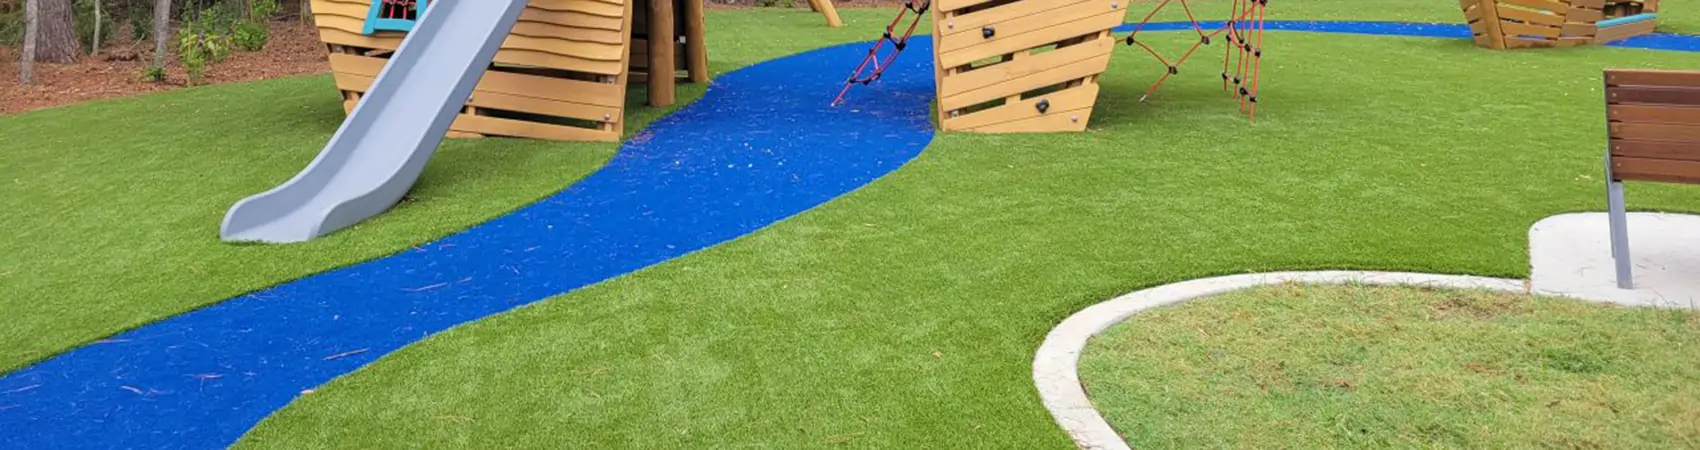 Commercial artificial grass playground from SYNLawn